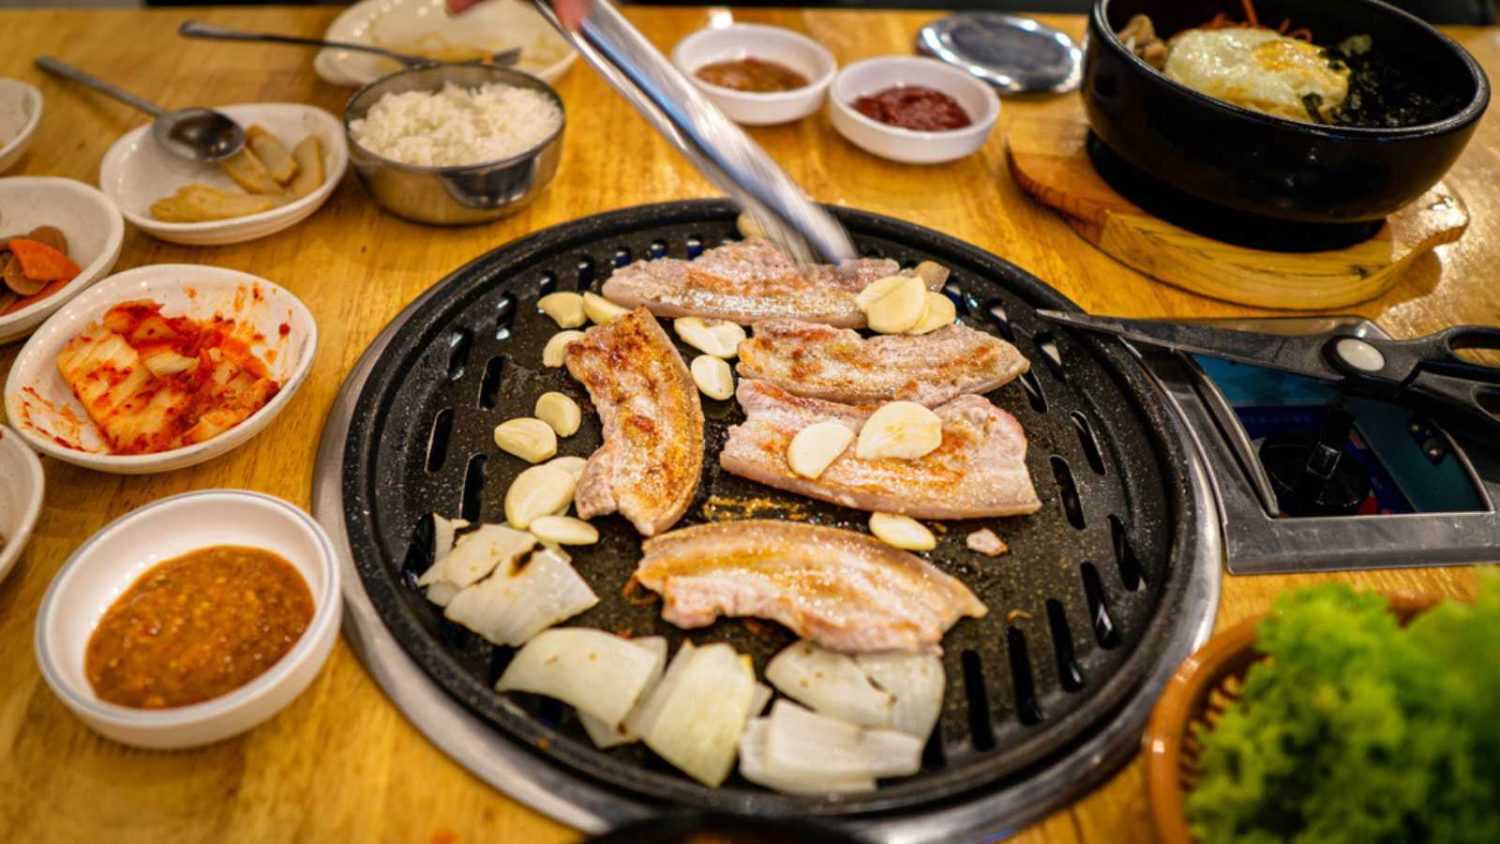 Korean Barbecue, where you could grill your own selected meat, and have side dishes such as the kimchi soup.